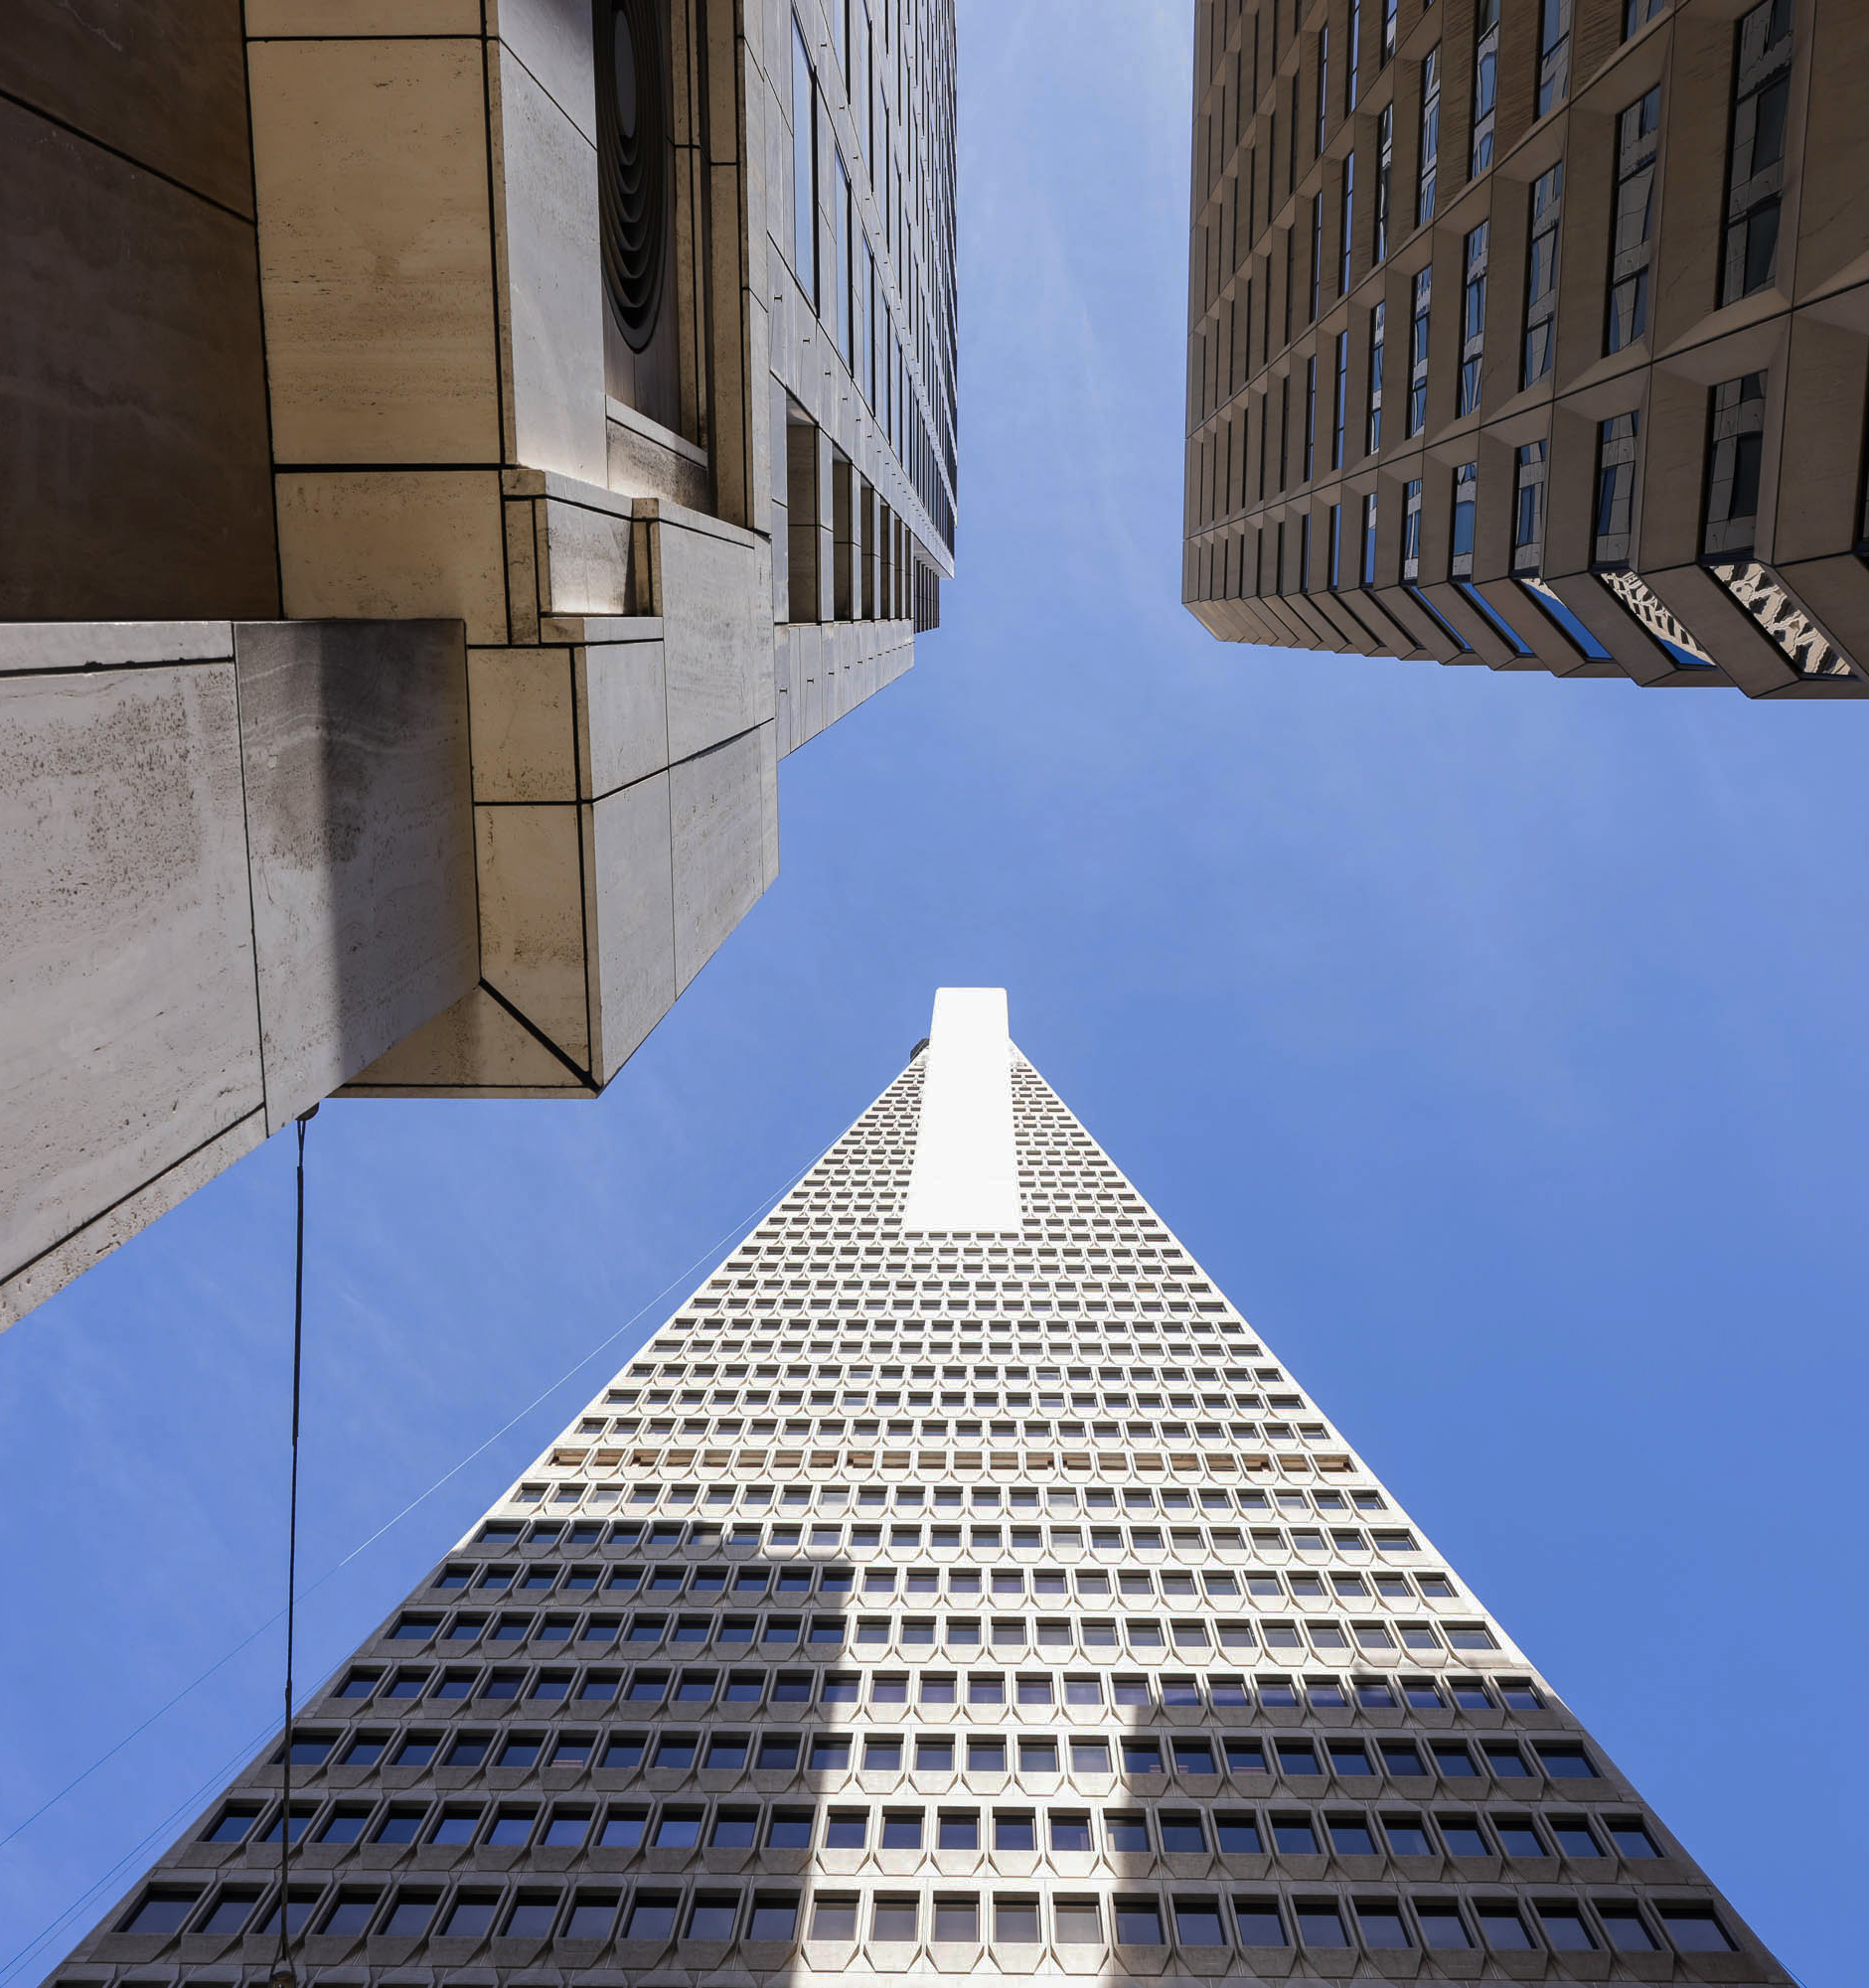 An upward view between high-rises towards a clear blue sky, showcasing contrasting building architectures.